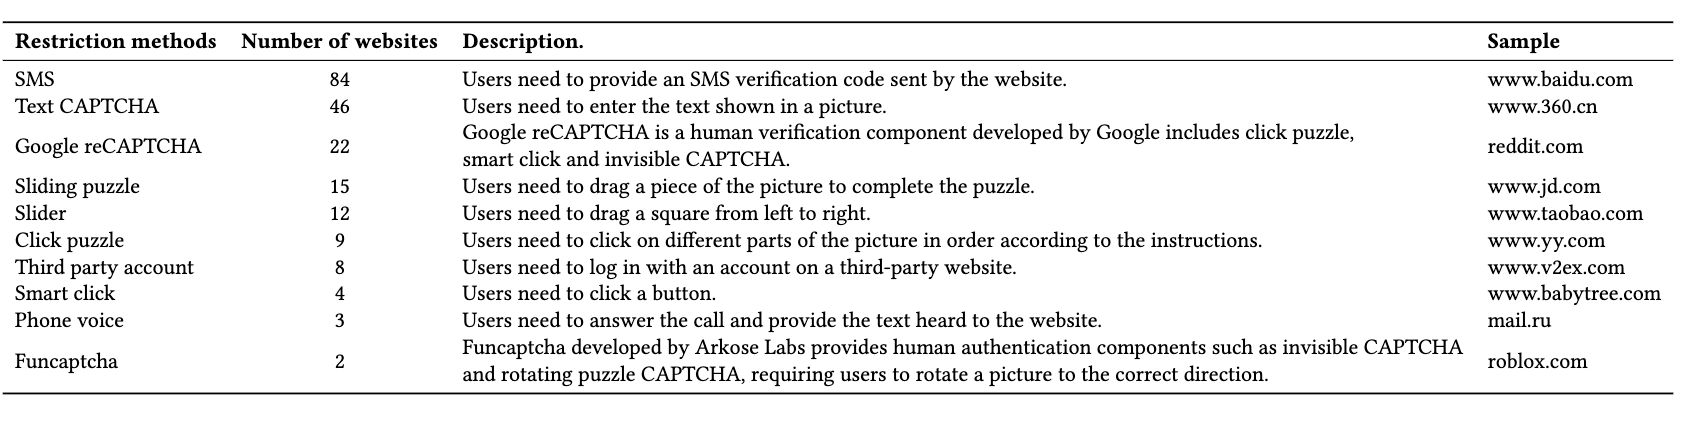 Human verification methods used by top websites, showing mostly SMS and CAPTCHA